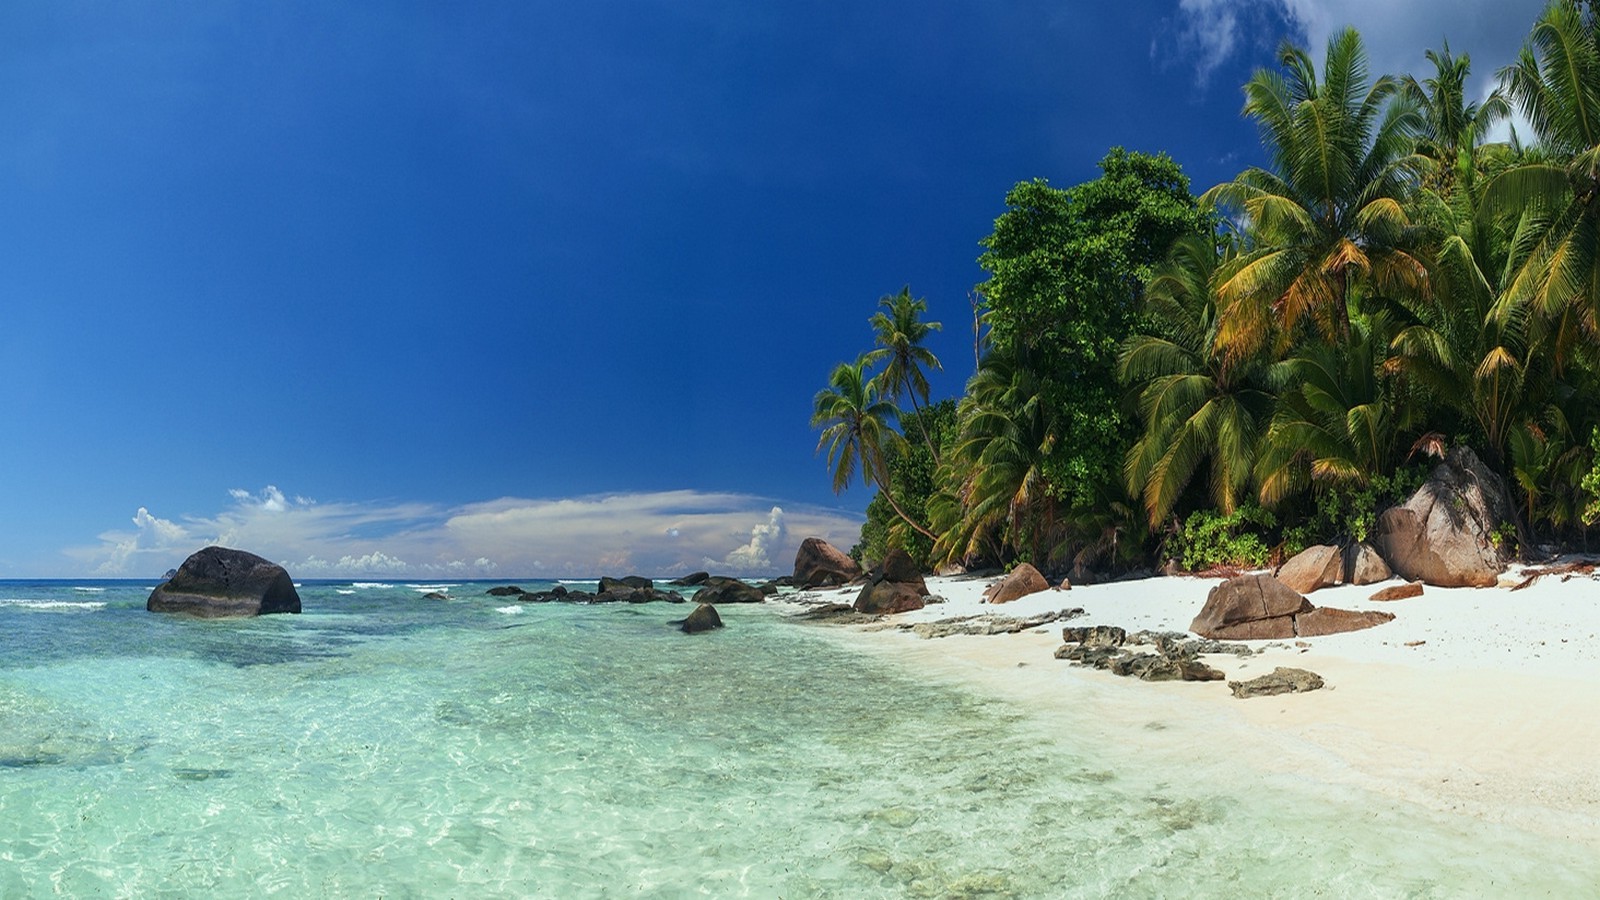 landscape, Beach, Nature, Palm Trees, Sea, Island, Seychelles, Sand, Tropical, Summer, Rock, Water, Vacations, Clouds Wallpaper